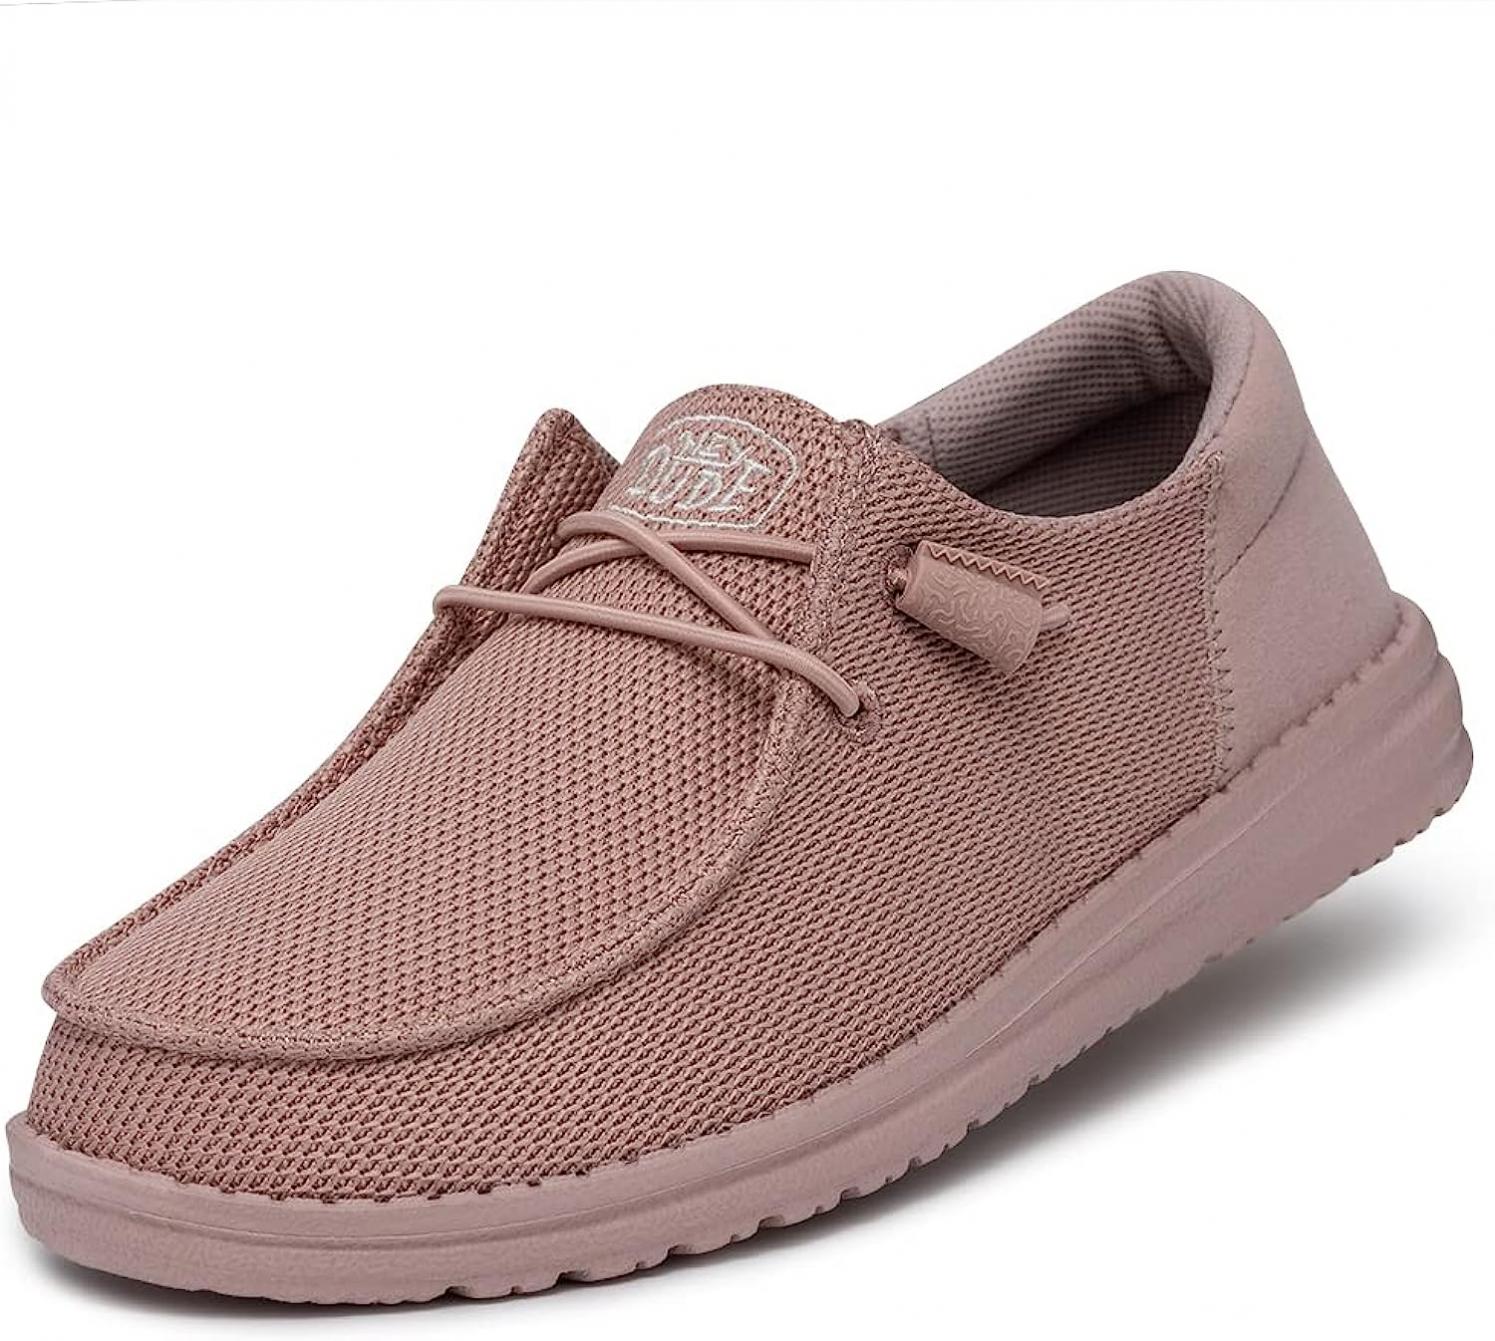 Hey Dude Women's Wendy Funk Mono Rose Sand Size 7 | Women's Shoes | Women's Slip On Shoes | Comfortable & Light-Weight